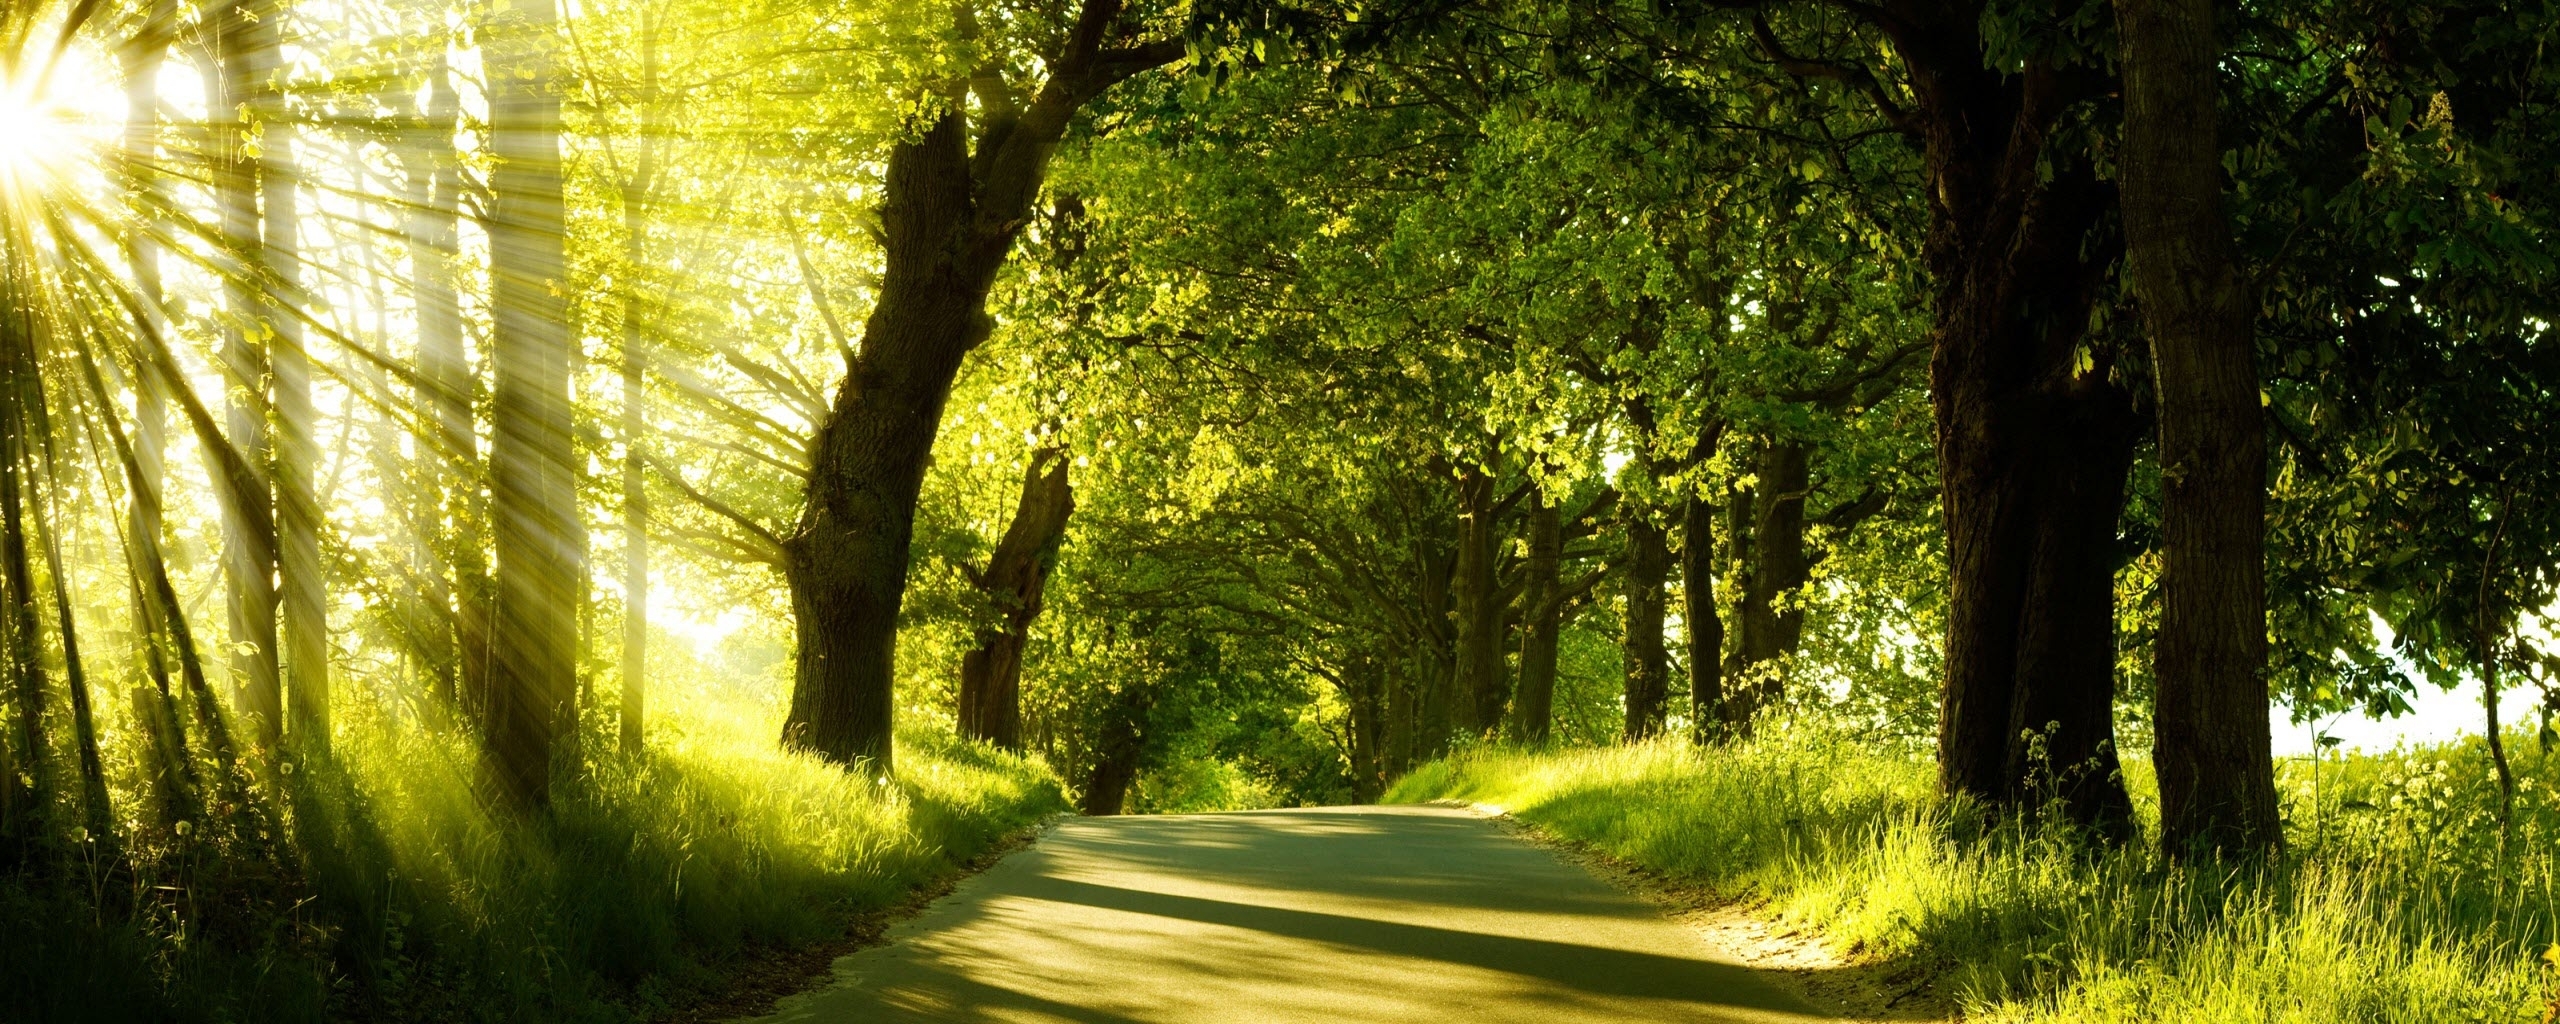 green nature dual monitor wallpapers | hd wallpapers | id #8220